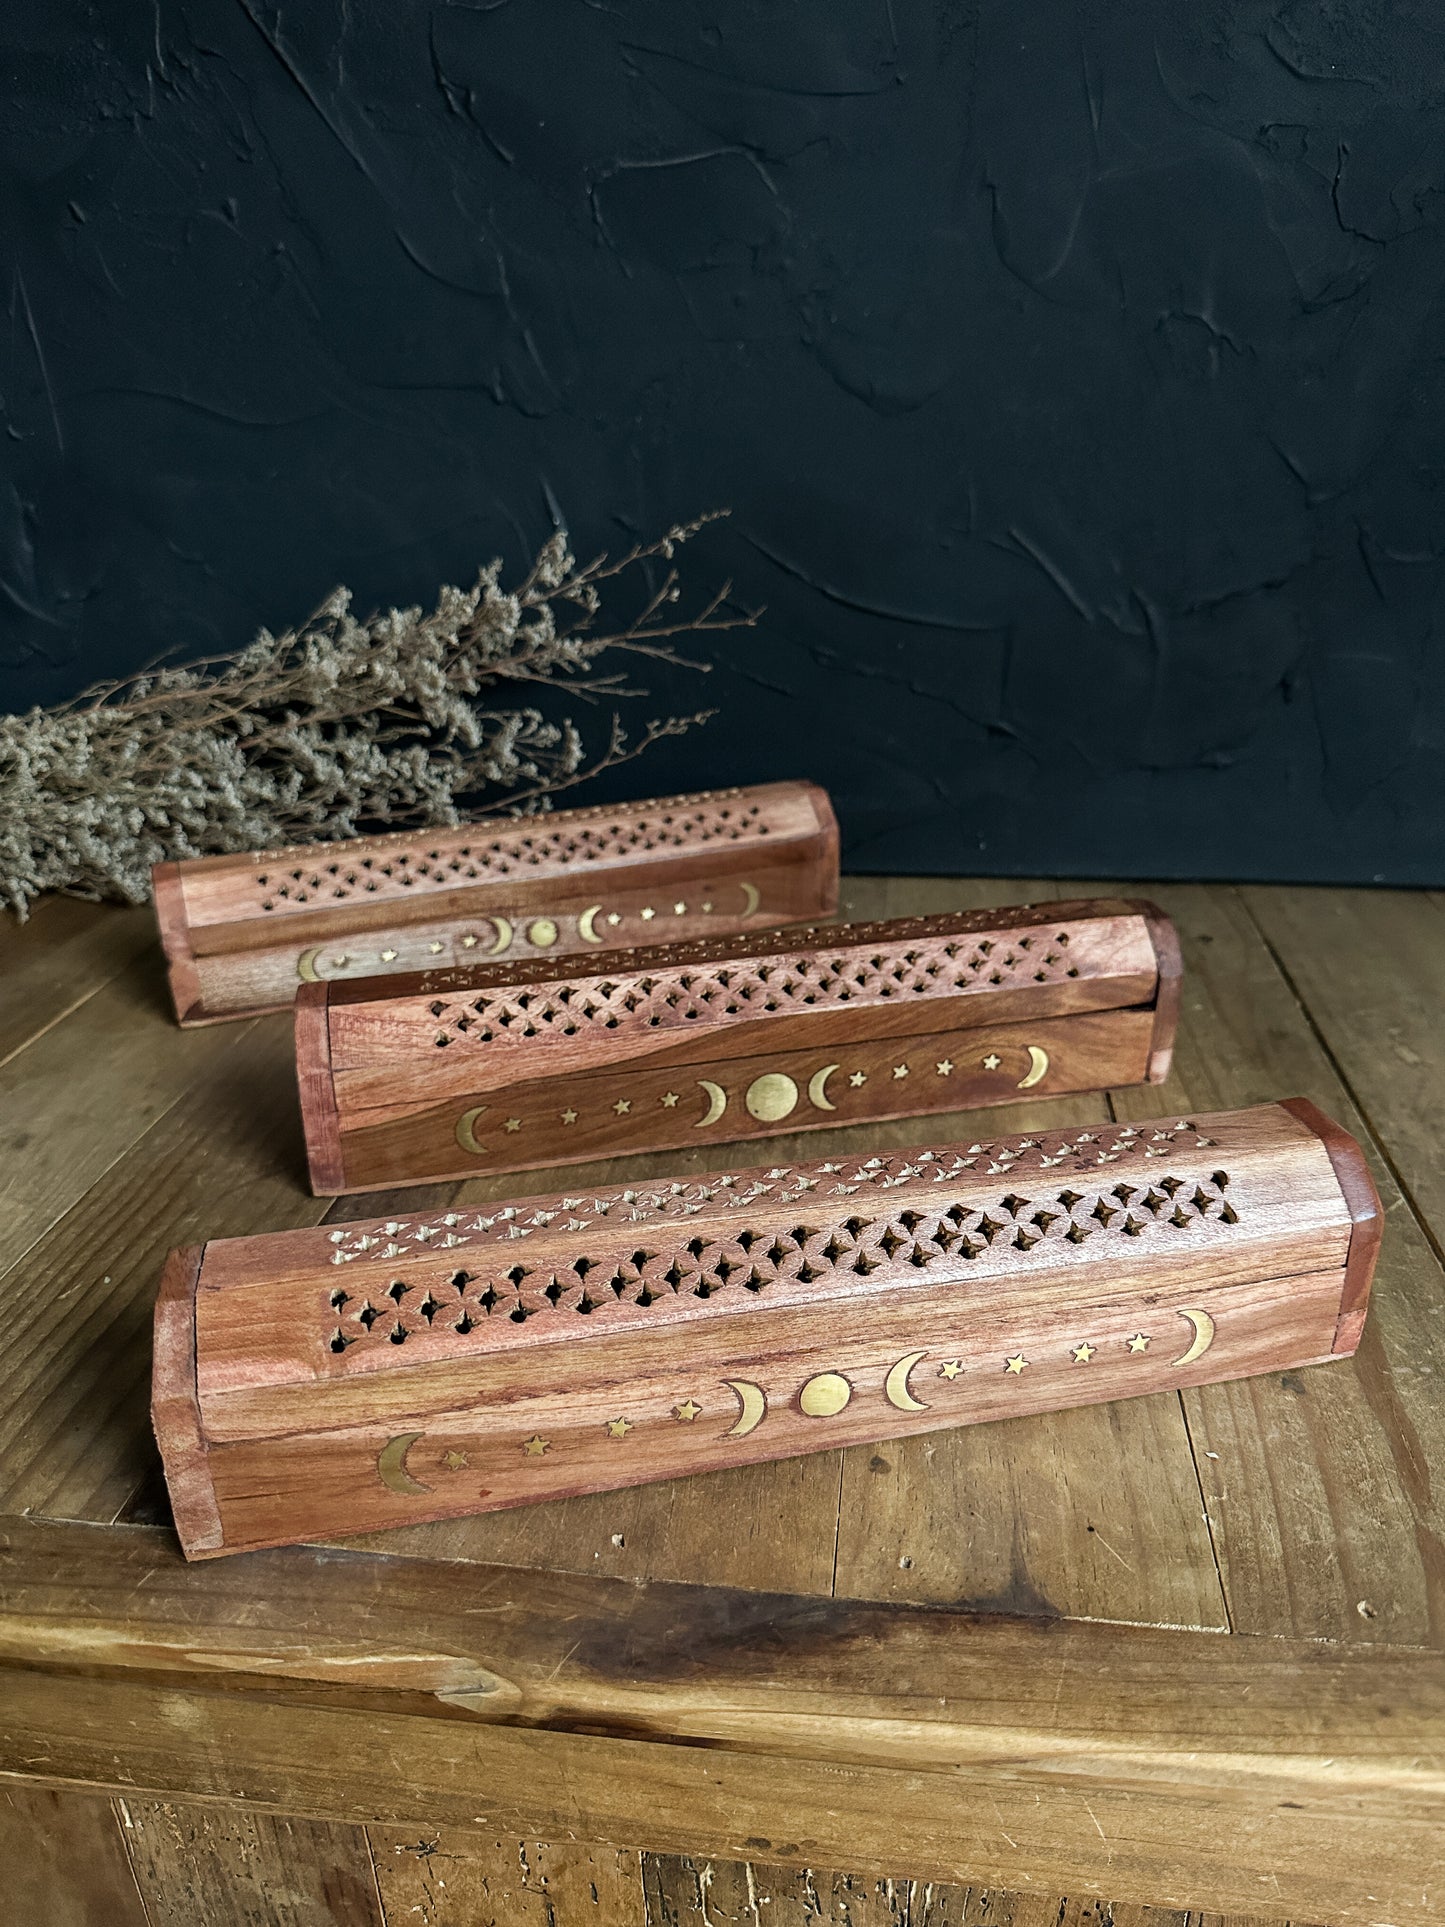 Wood incense burner storage box featuring brass moon and star inlays on the lid, perfect for safely storing incense sticks and cones. Sold at The Stone Maidens